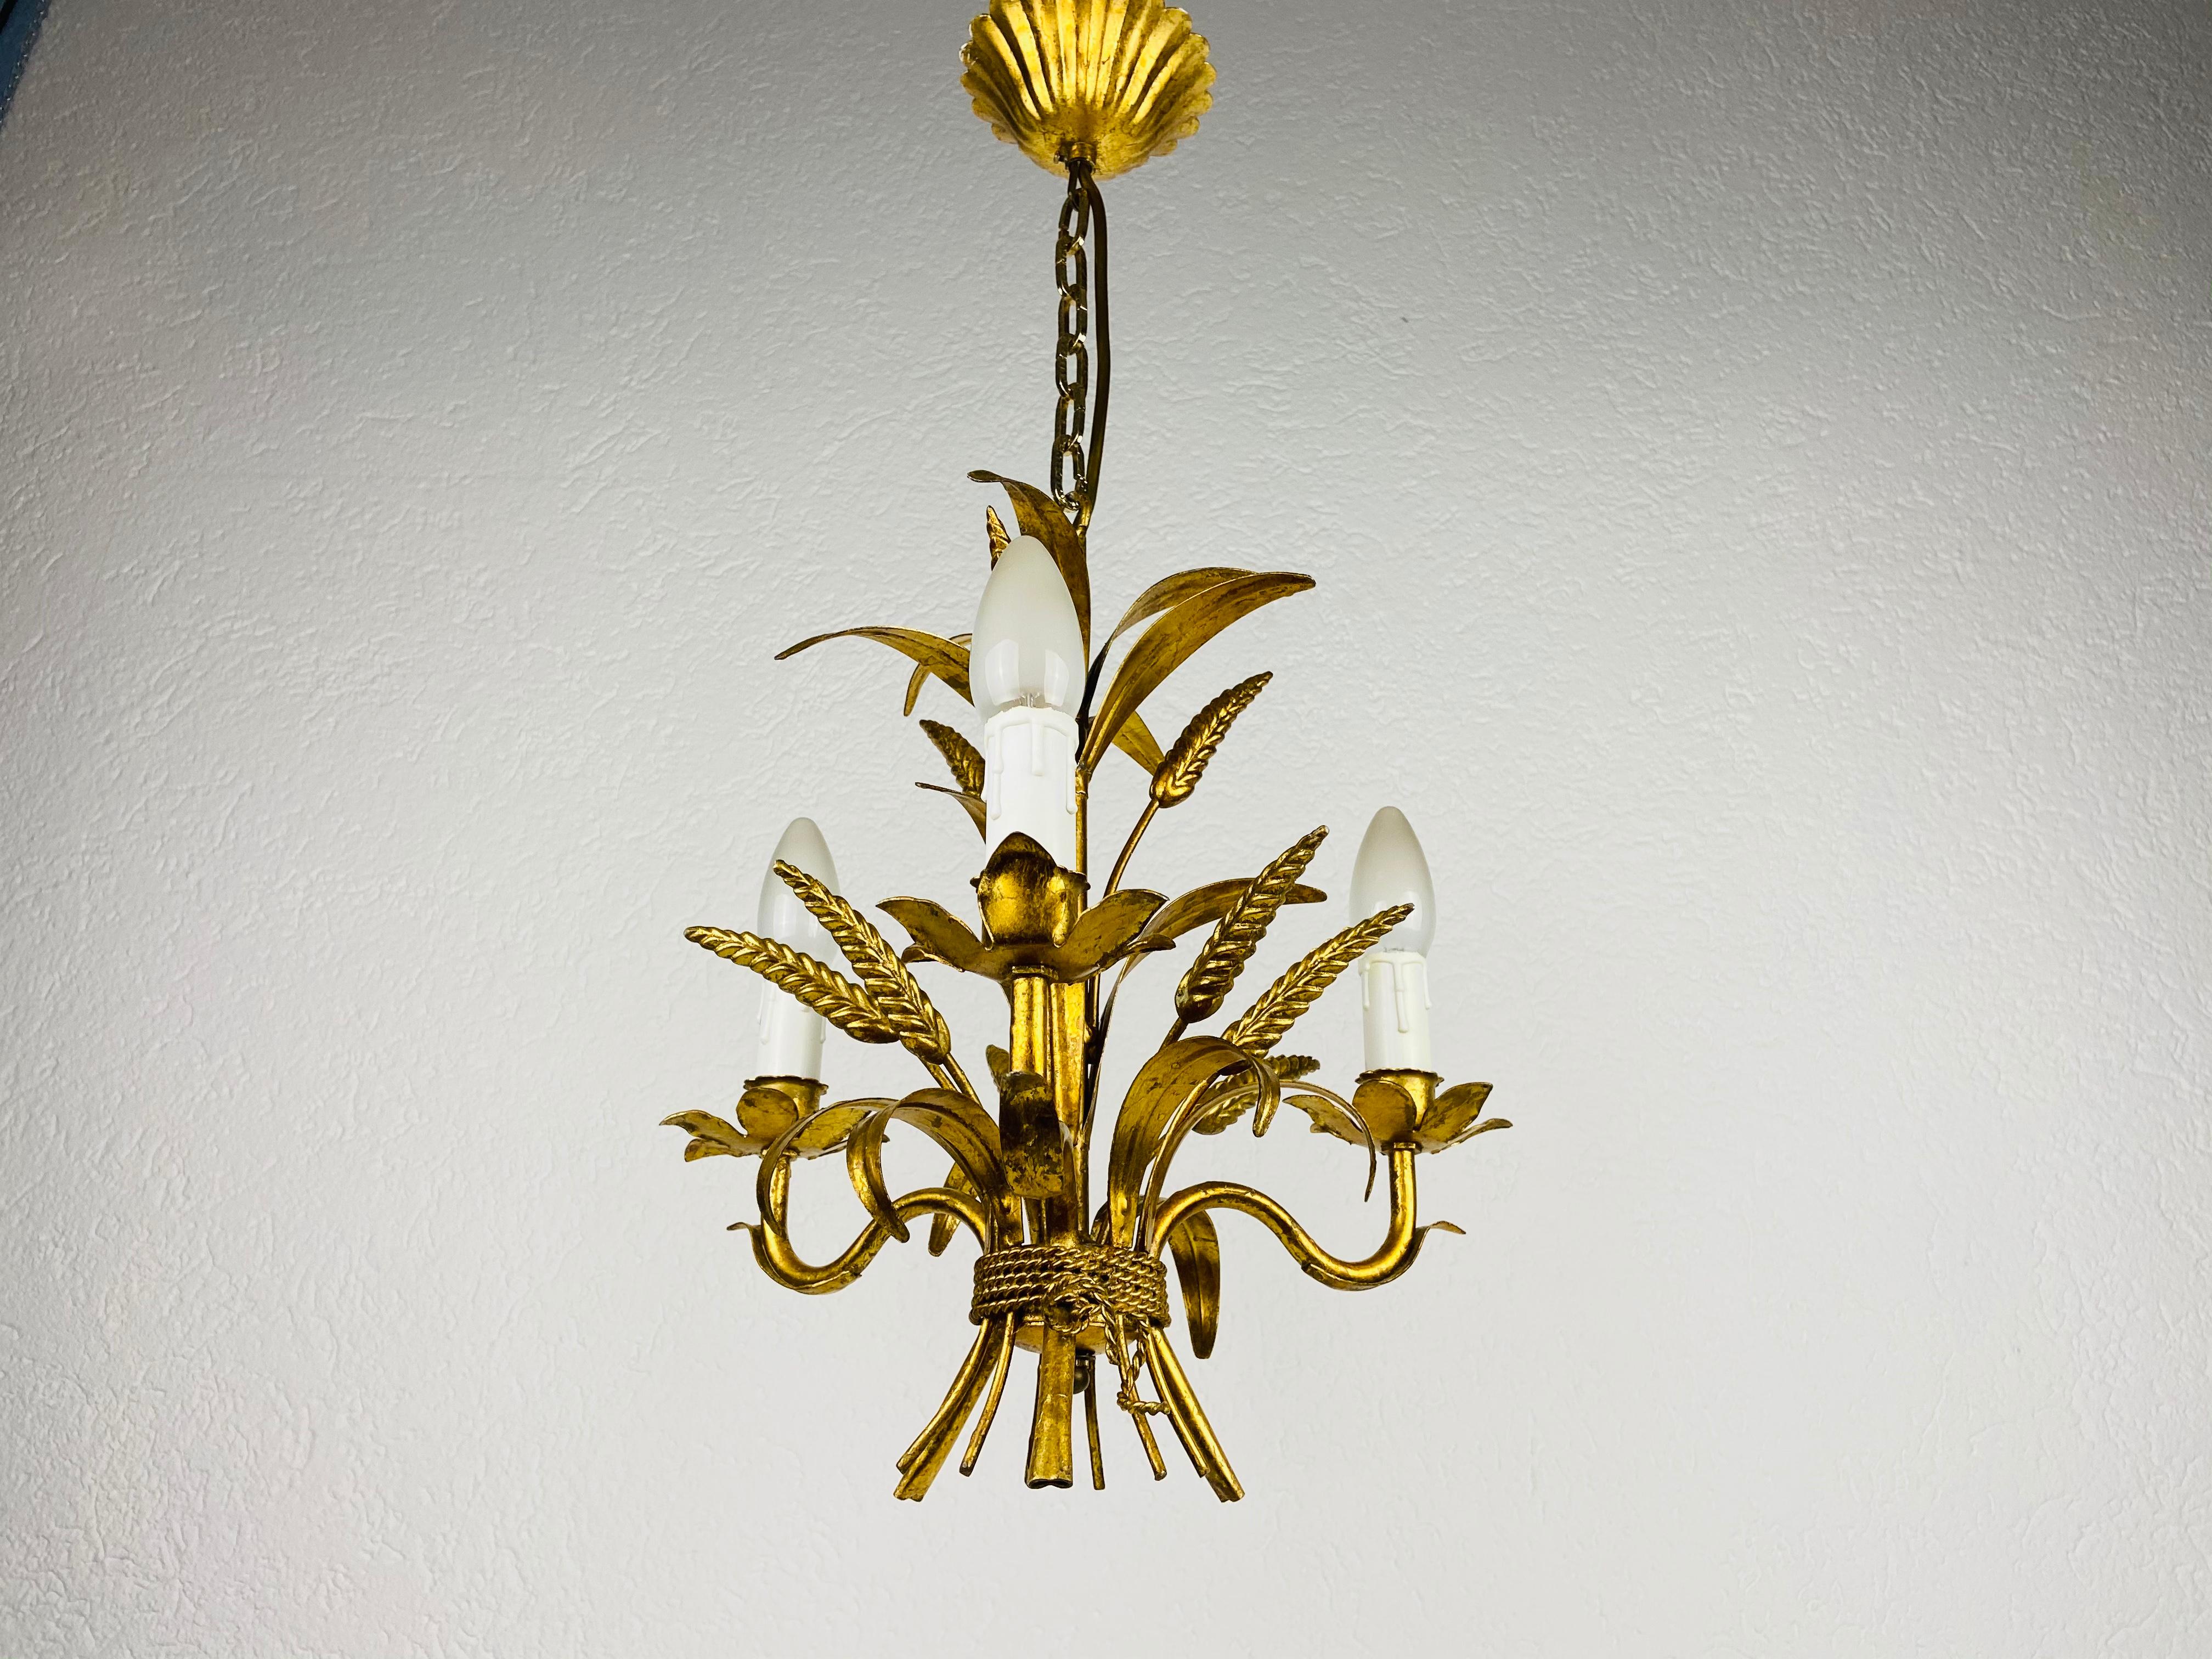 Golden Wheat Sheaf Pendant Lamp by Hans Kögl, Germany, 1970s For Sale 4